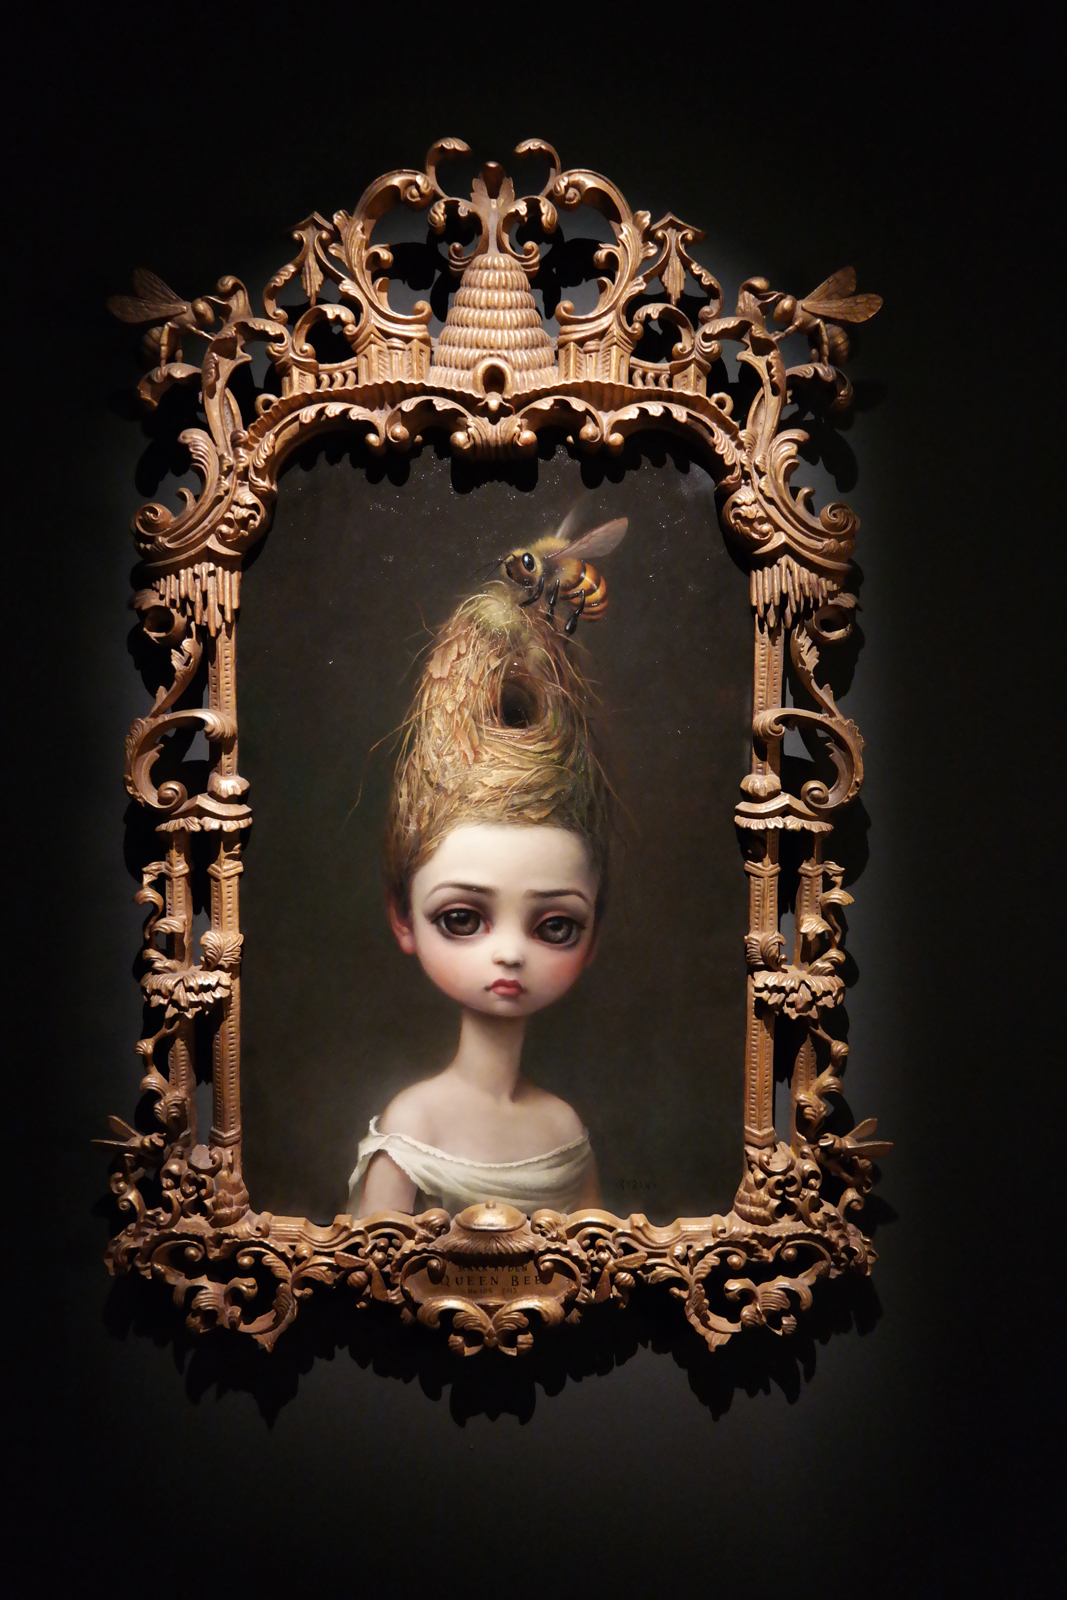 Hey! Act III exposition Halle saint pierre paris exhibition Queen Bee 2013 oil on canvas by Mark Ryden american painter collection privée photo usofparis